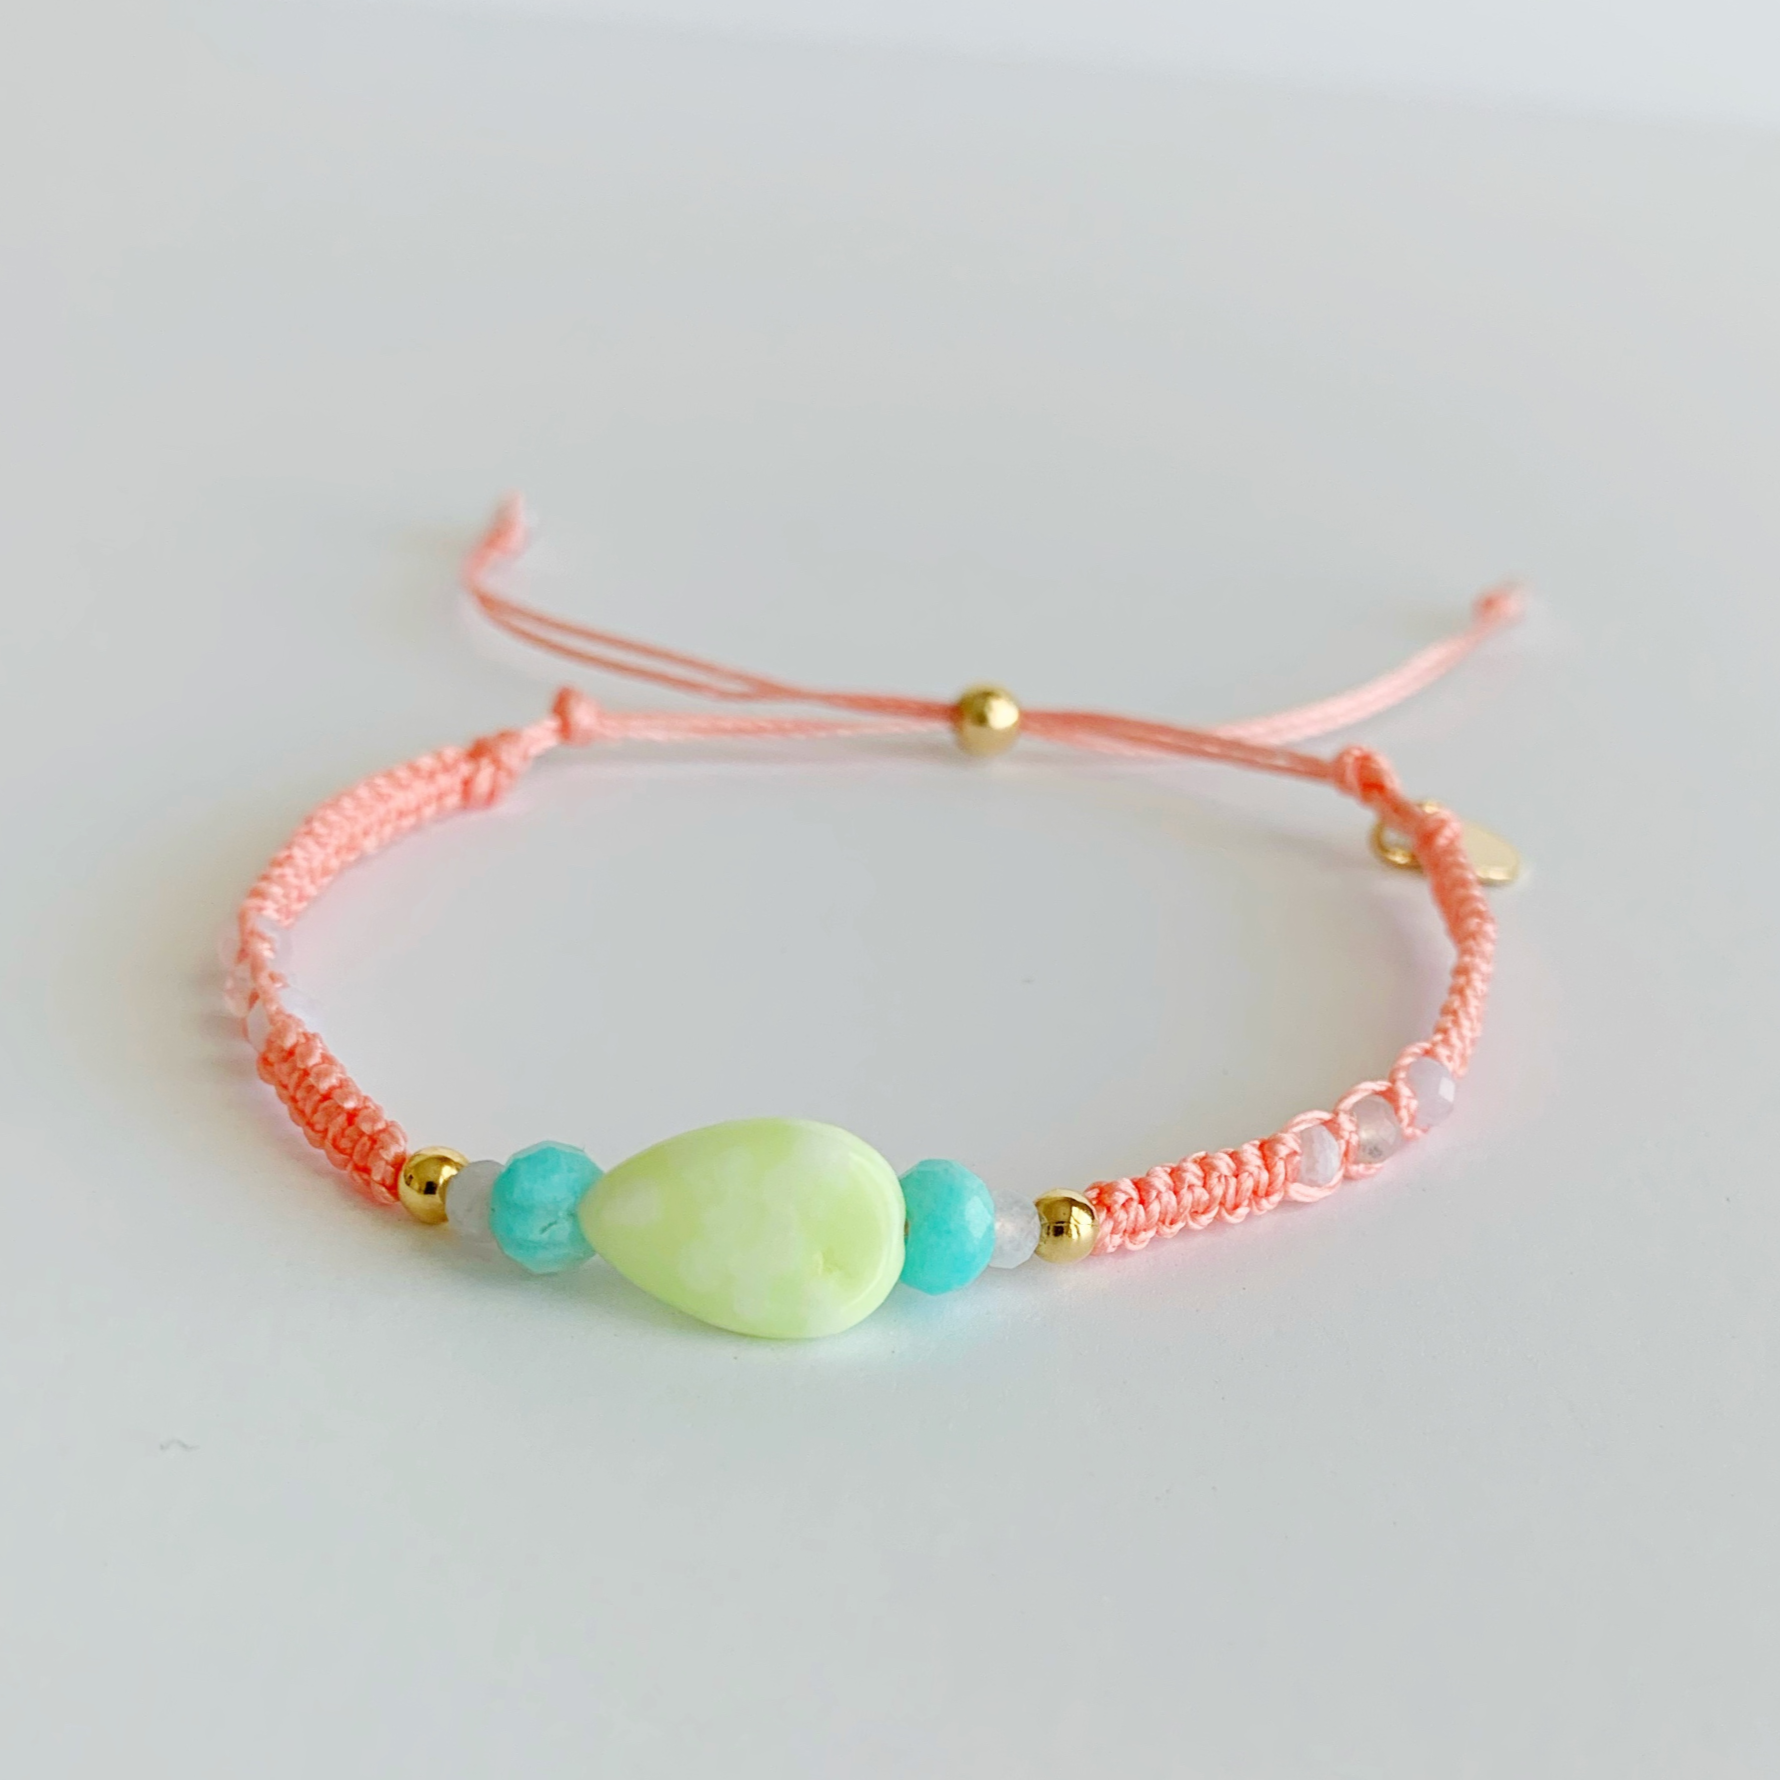 Peach color macramé cord bracelet with teardrop shaped lime jade bead and bright aqua amazonite beads at the center of the bracelet on a white background